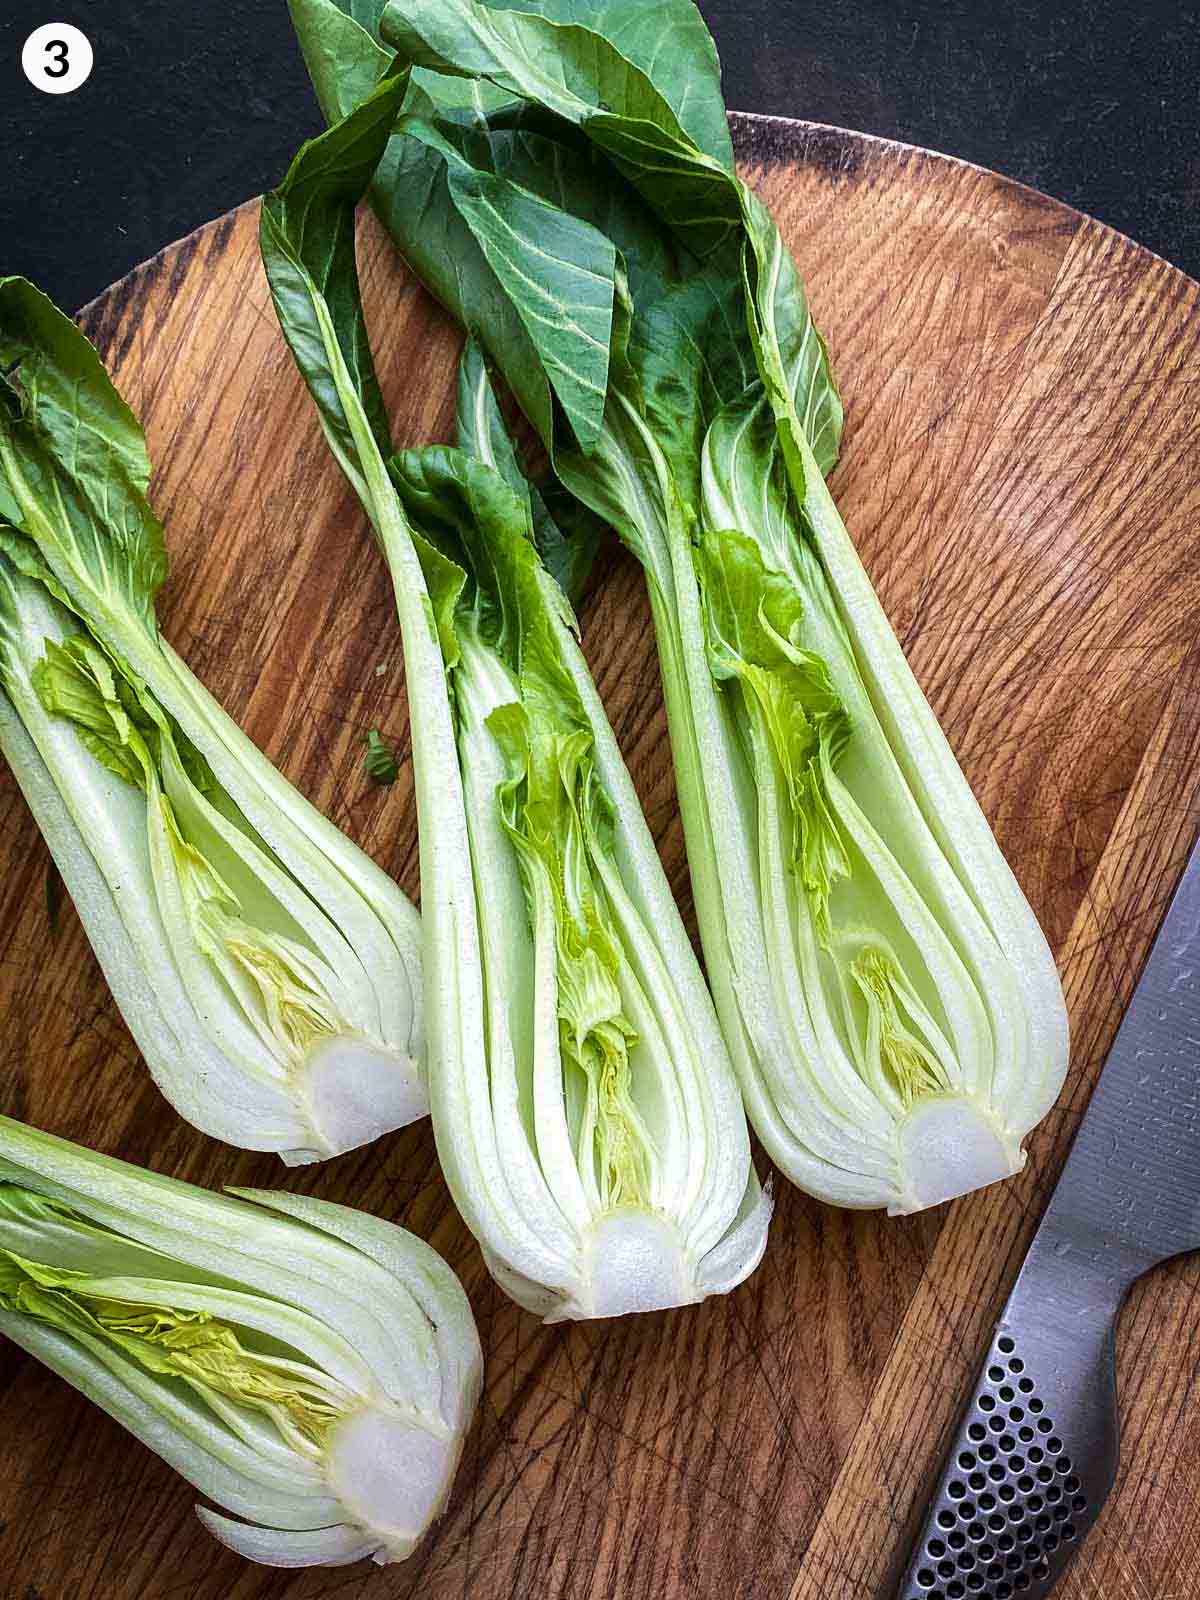 Cutting bok choy in half with a knife resting a on a wooden chopping board